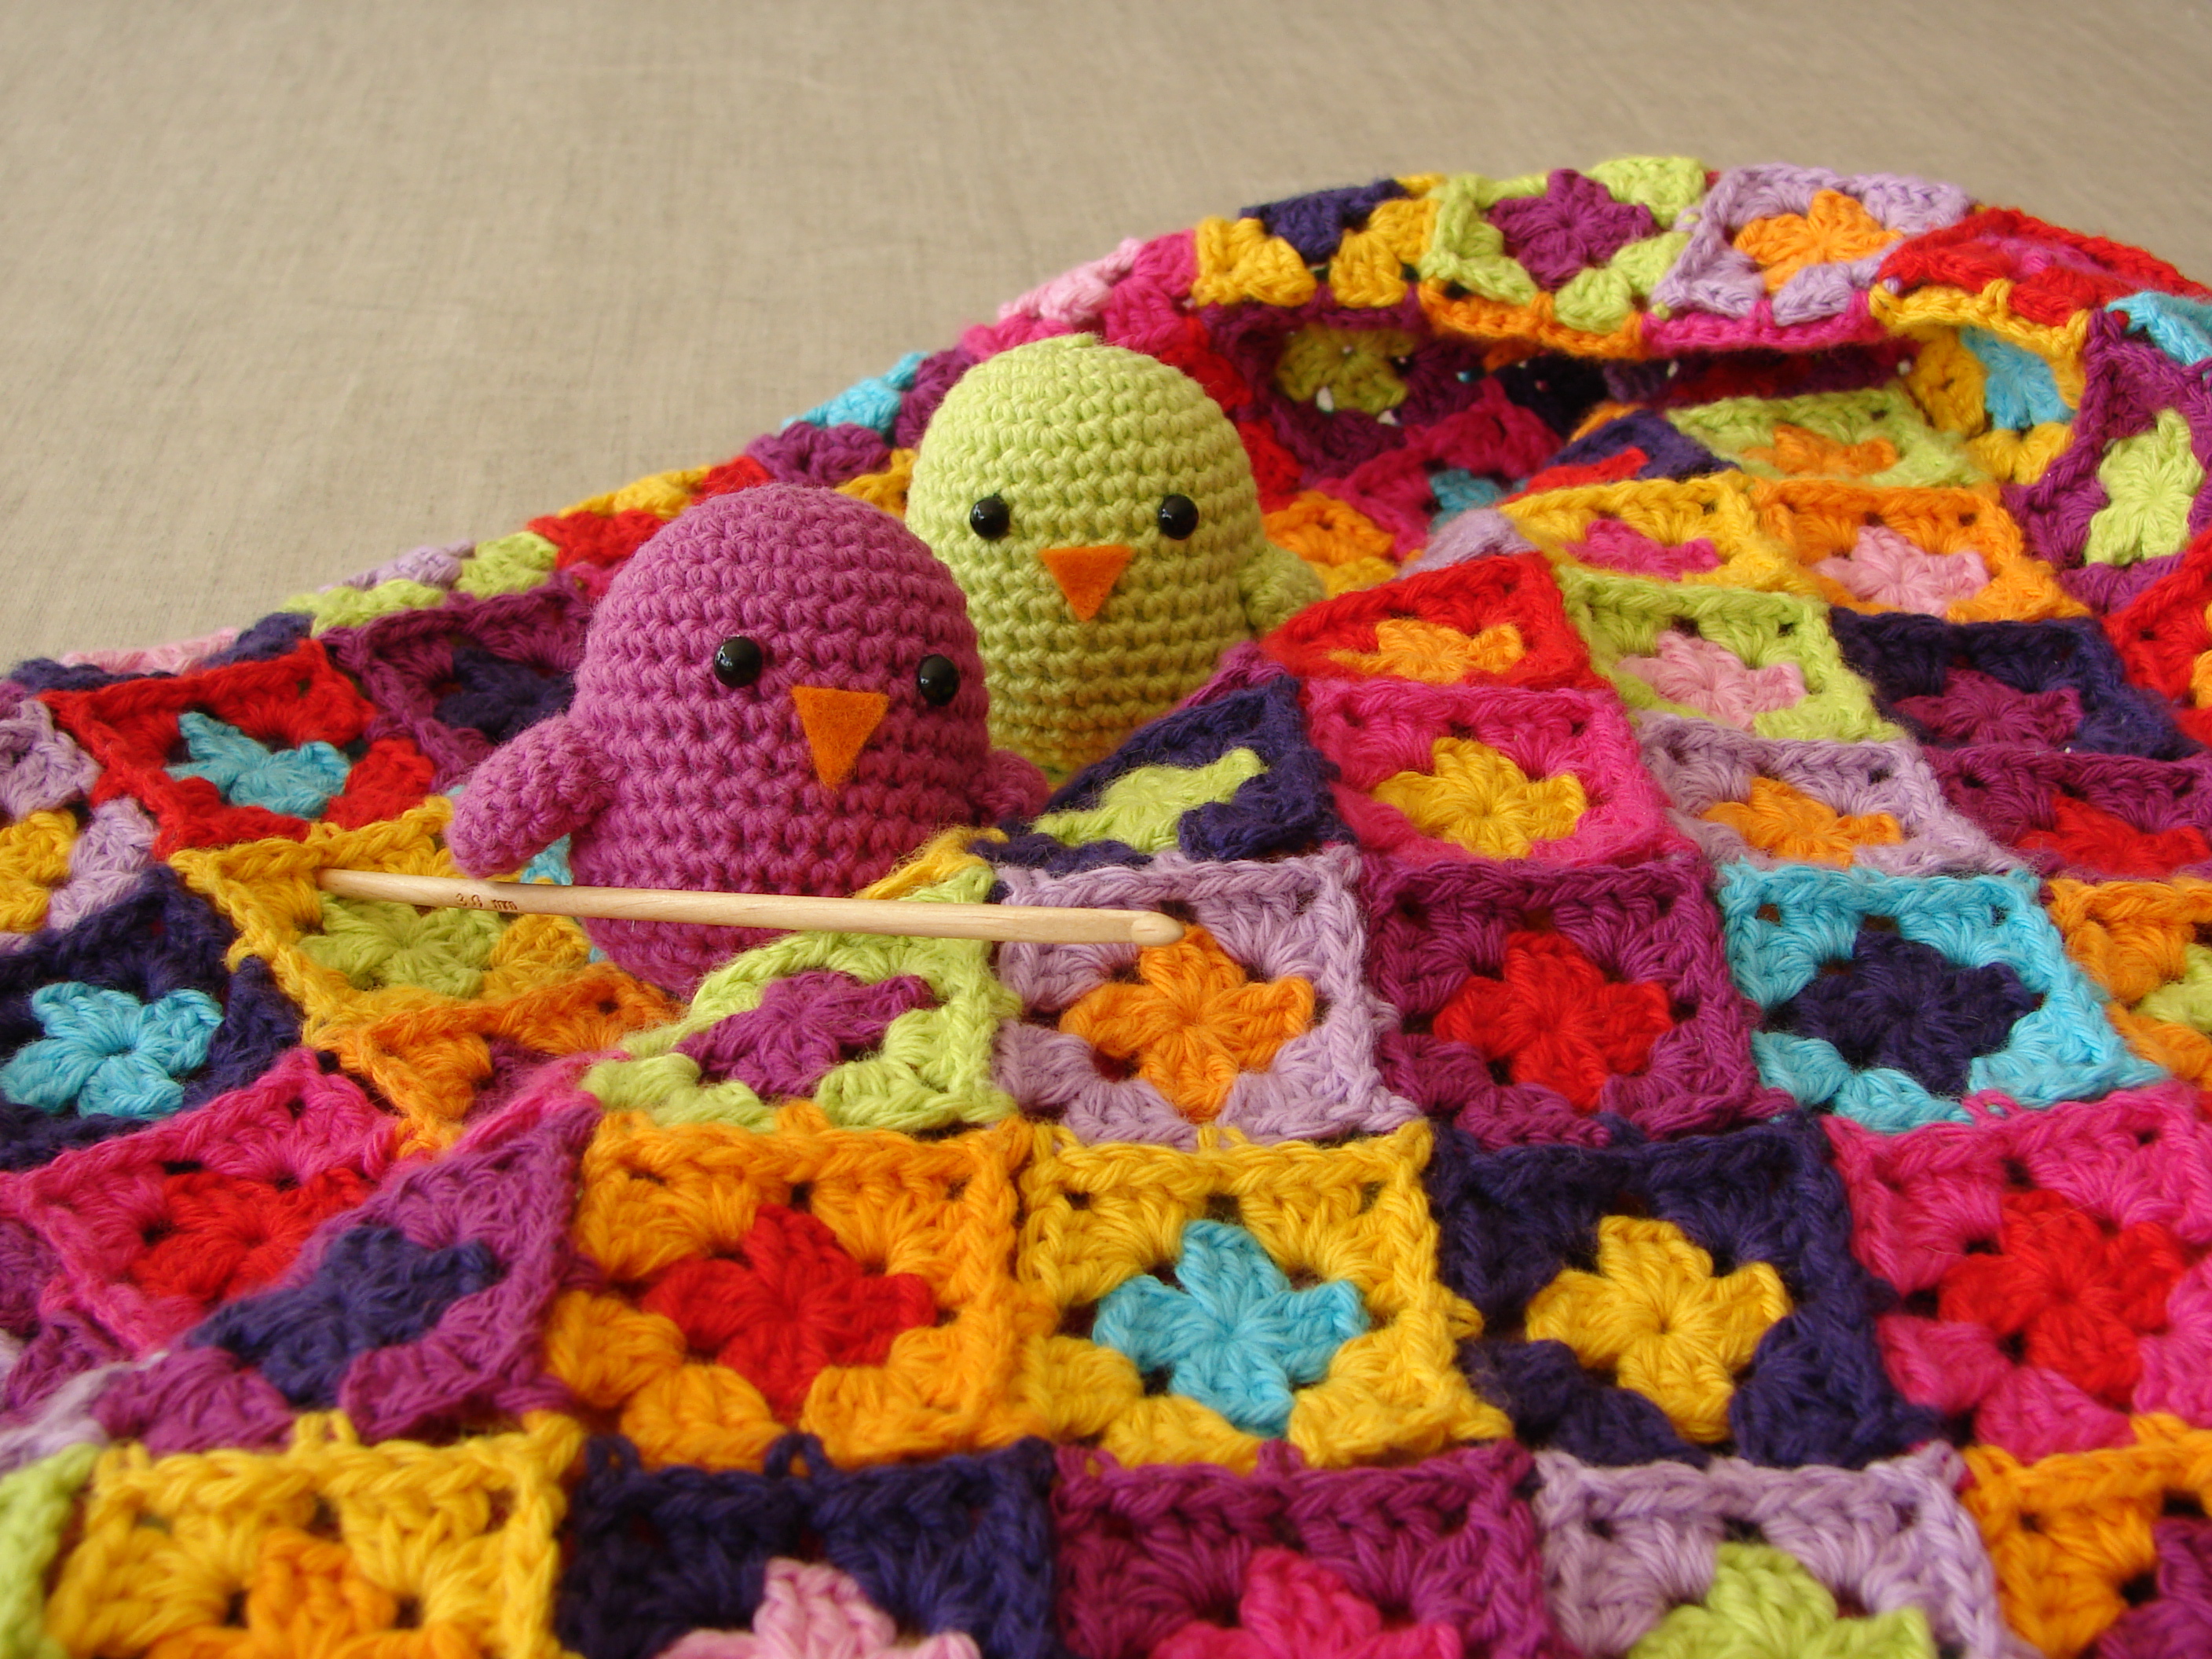 Cool Free Crochet Baby Blanket Patterns images